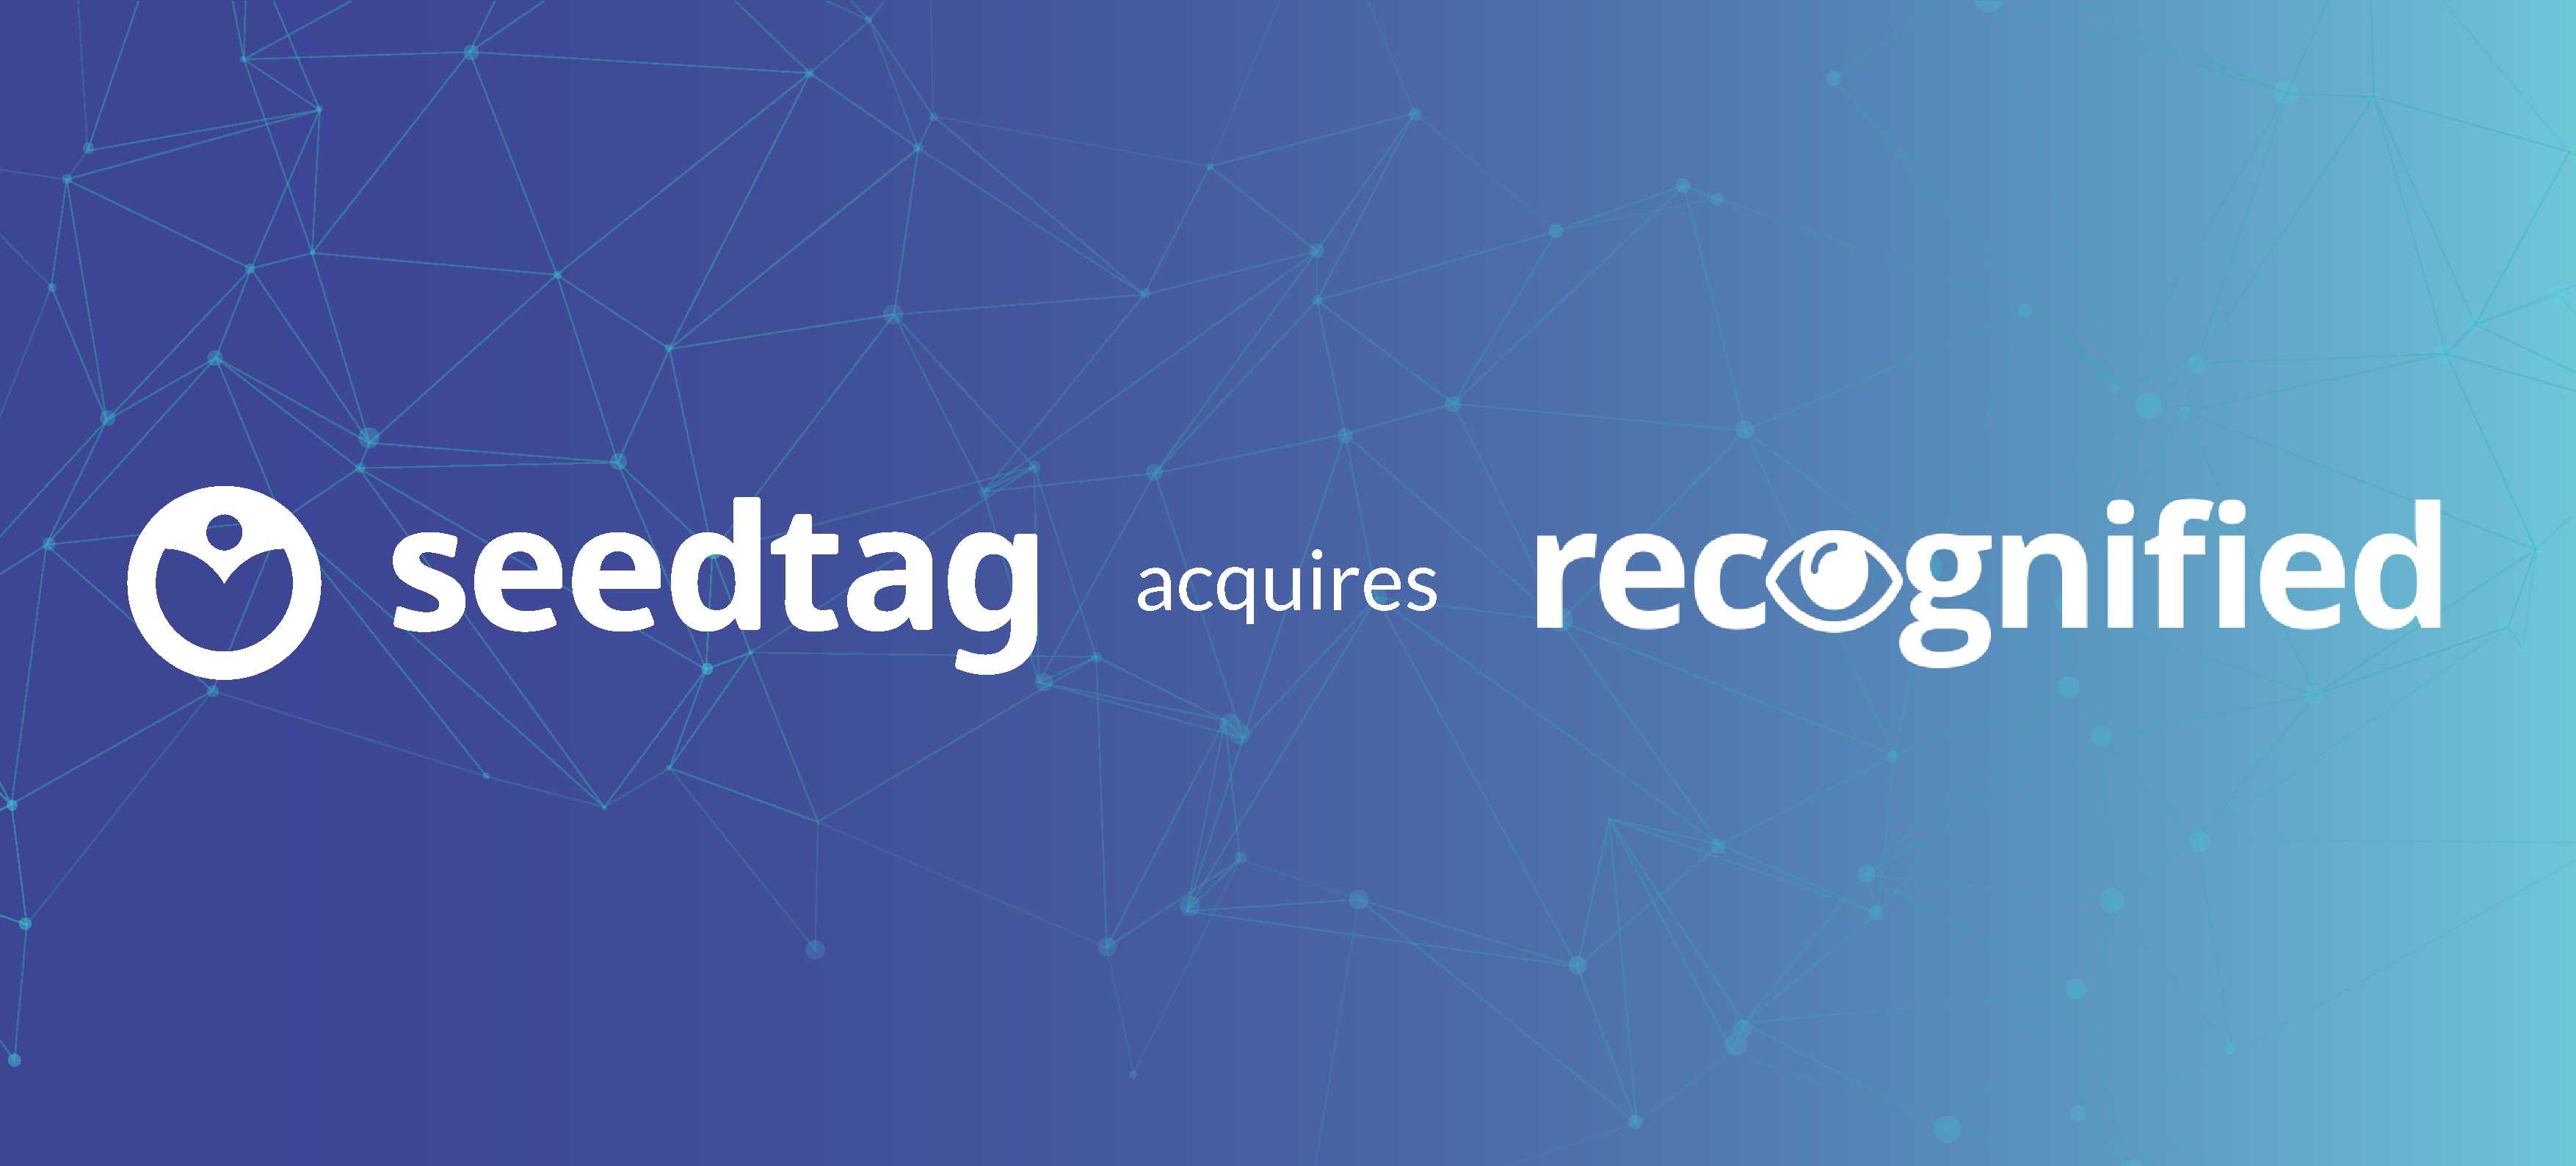 Seedtag acquires Recognified-1